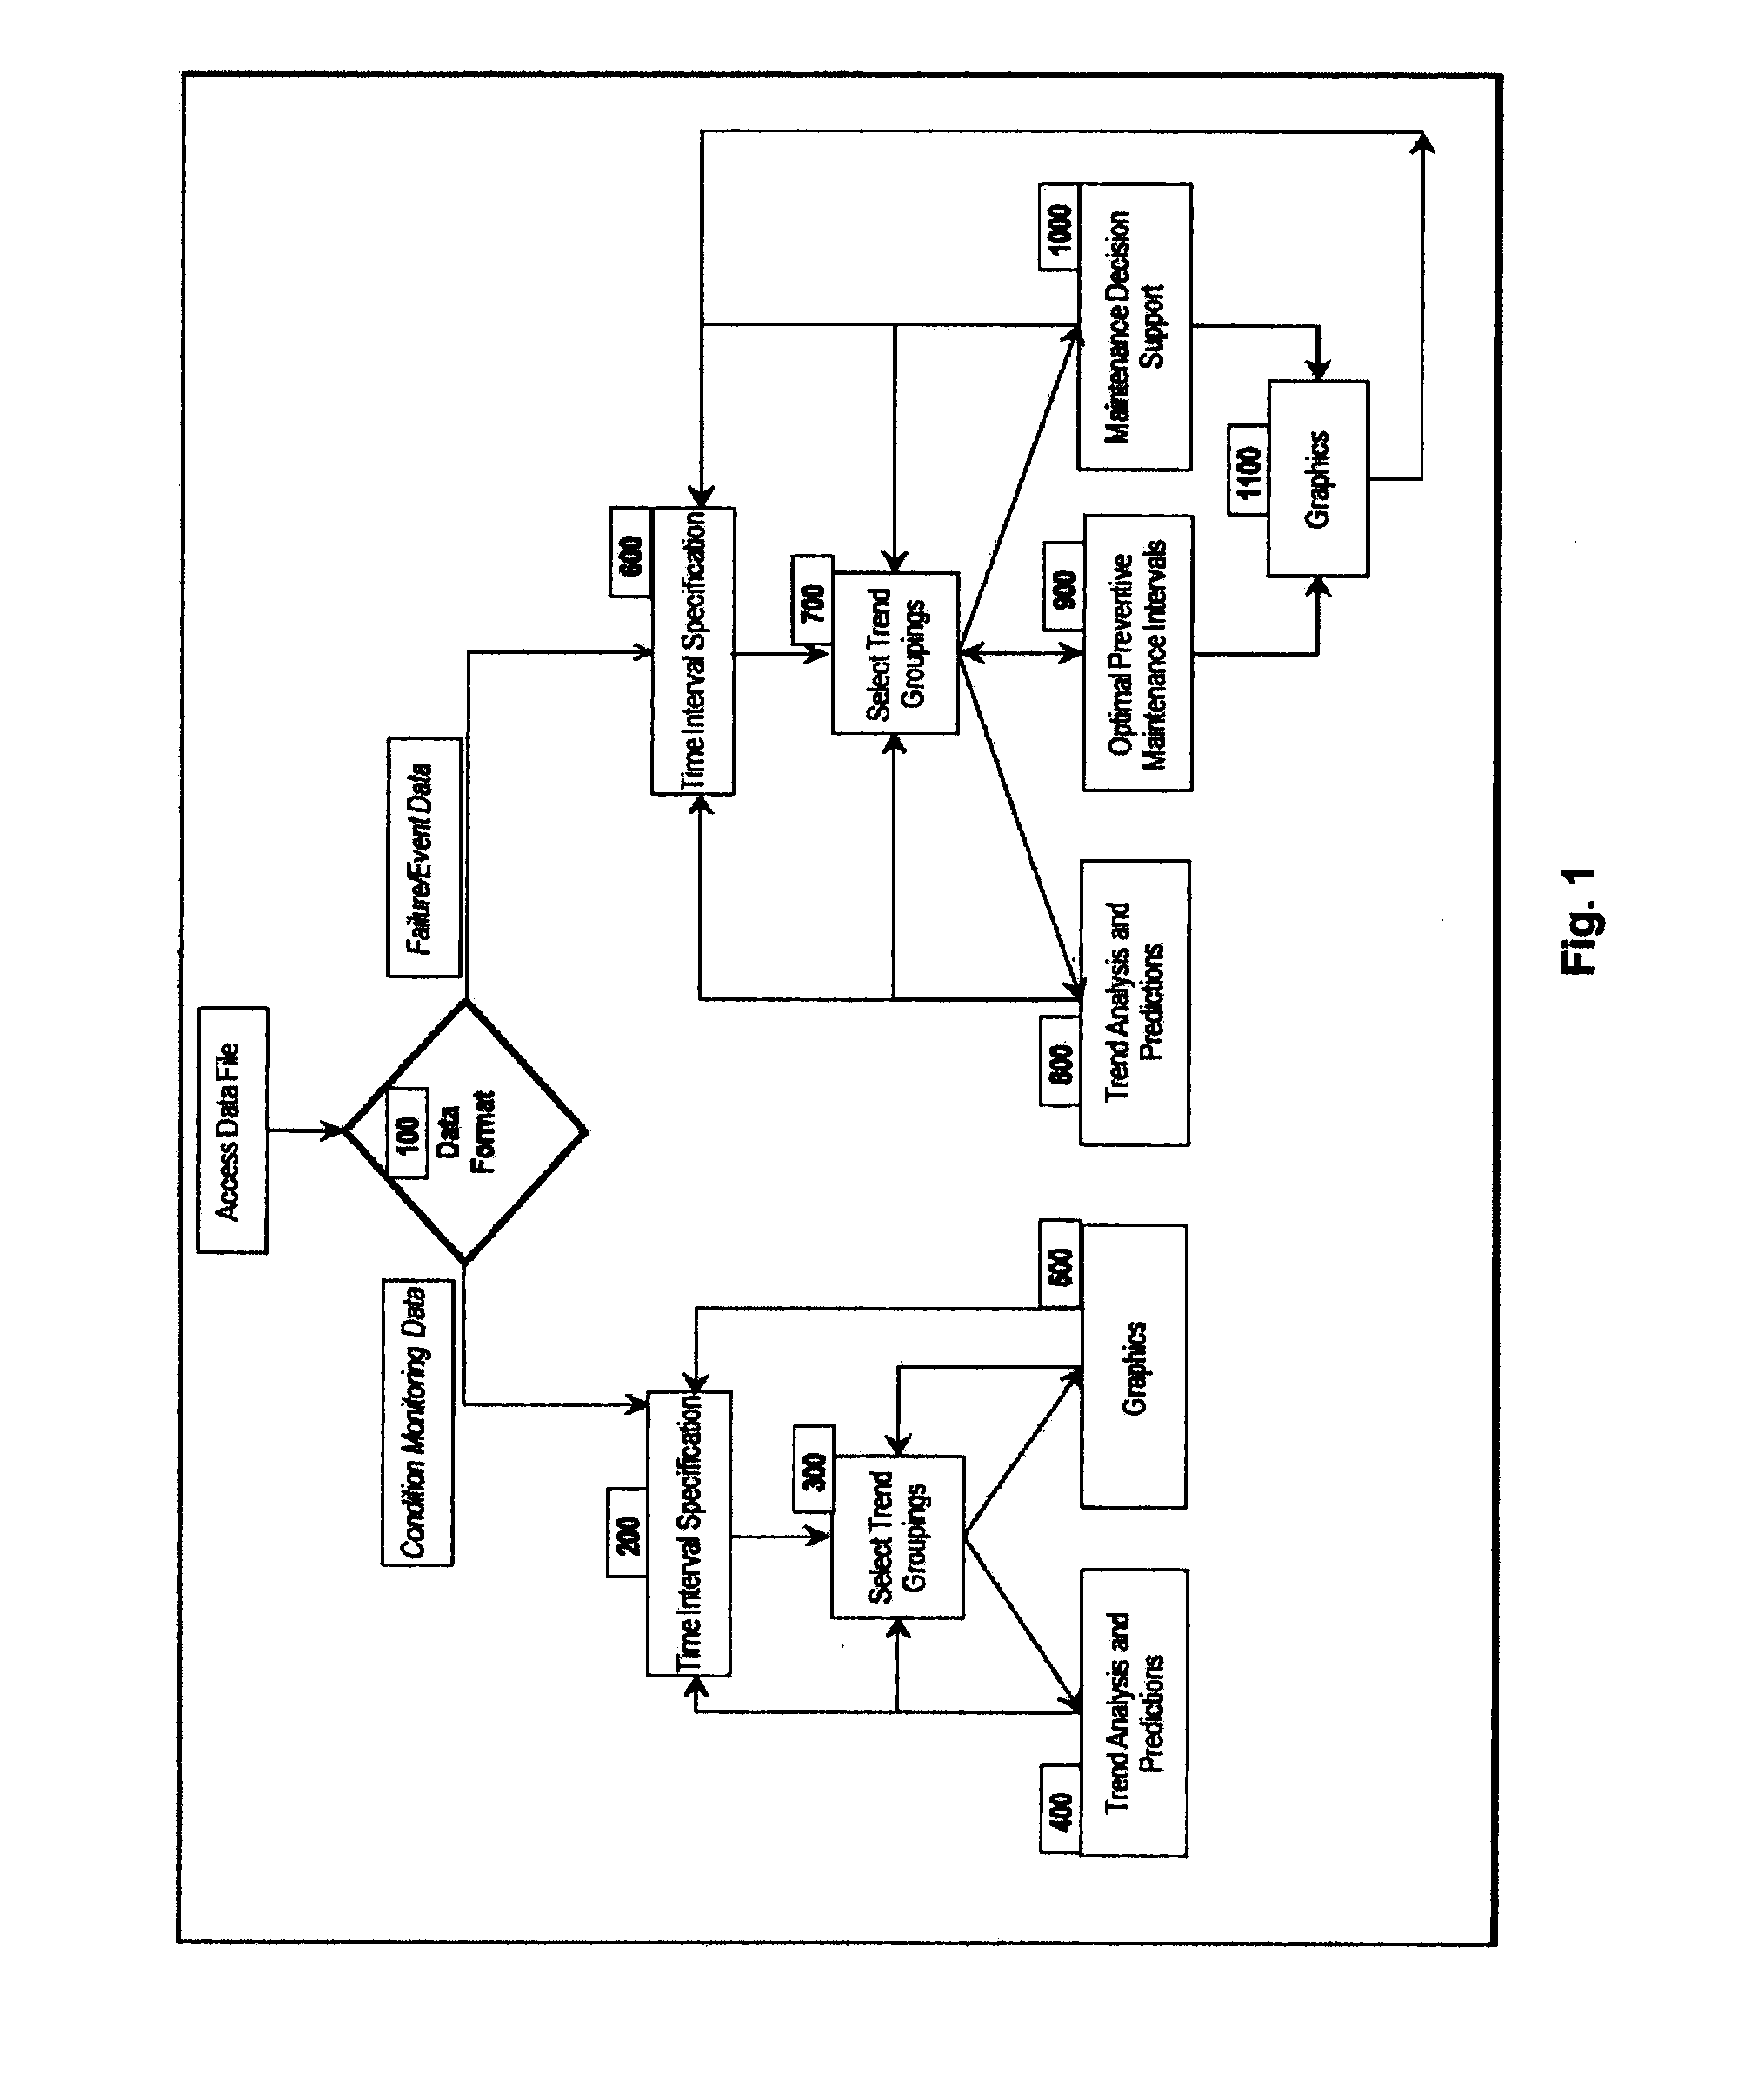 System and method for the dynamic analysis of event data